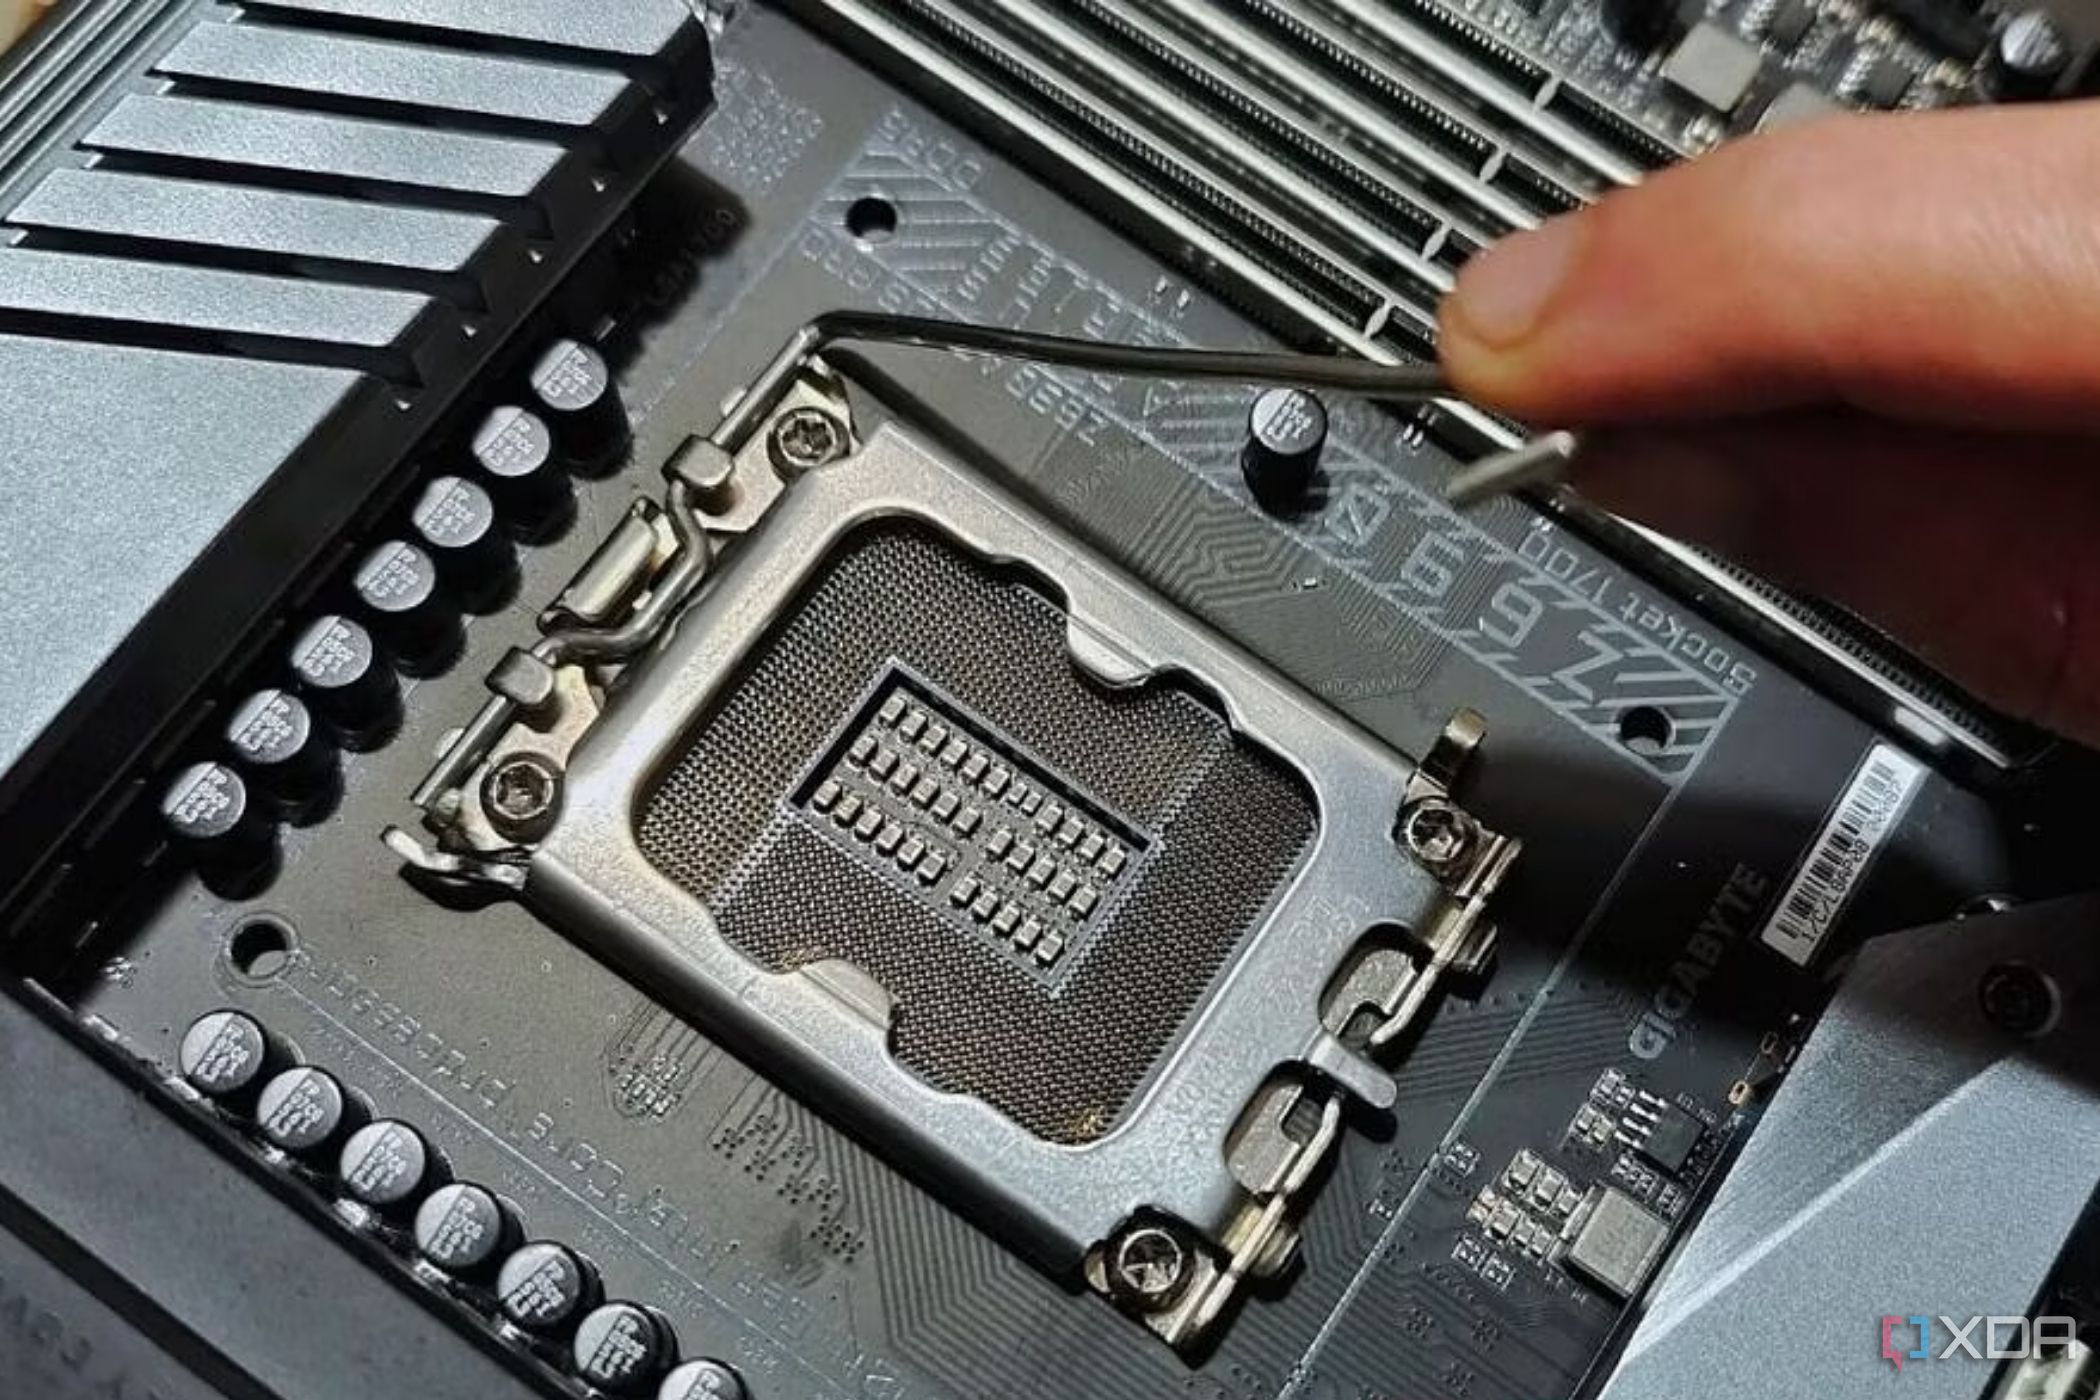 An image showing a person holding the metal level located next to the CPU socket.